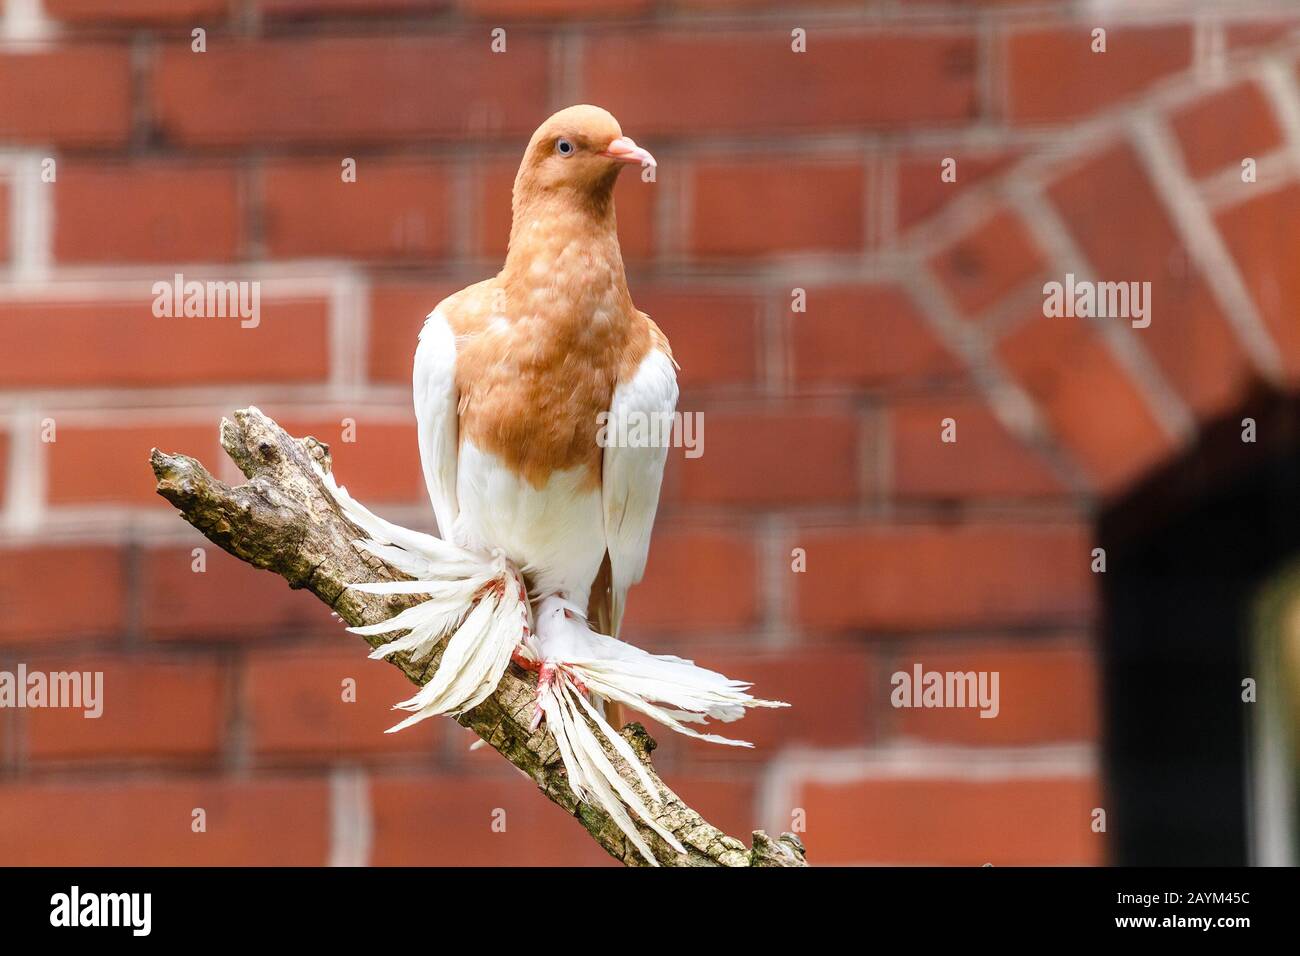 A decorative pigeon breed. Dove with shaggy and furry paws sitting on a tree in bird house Stock Photo